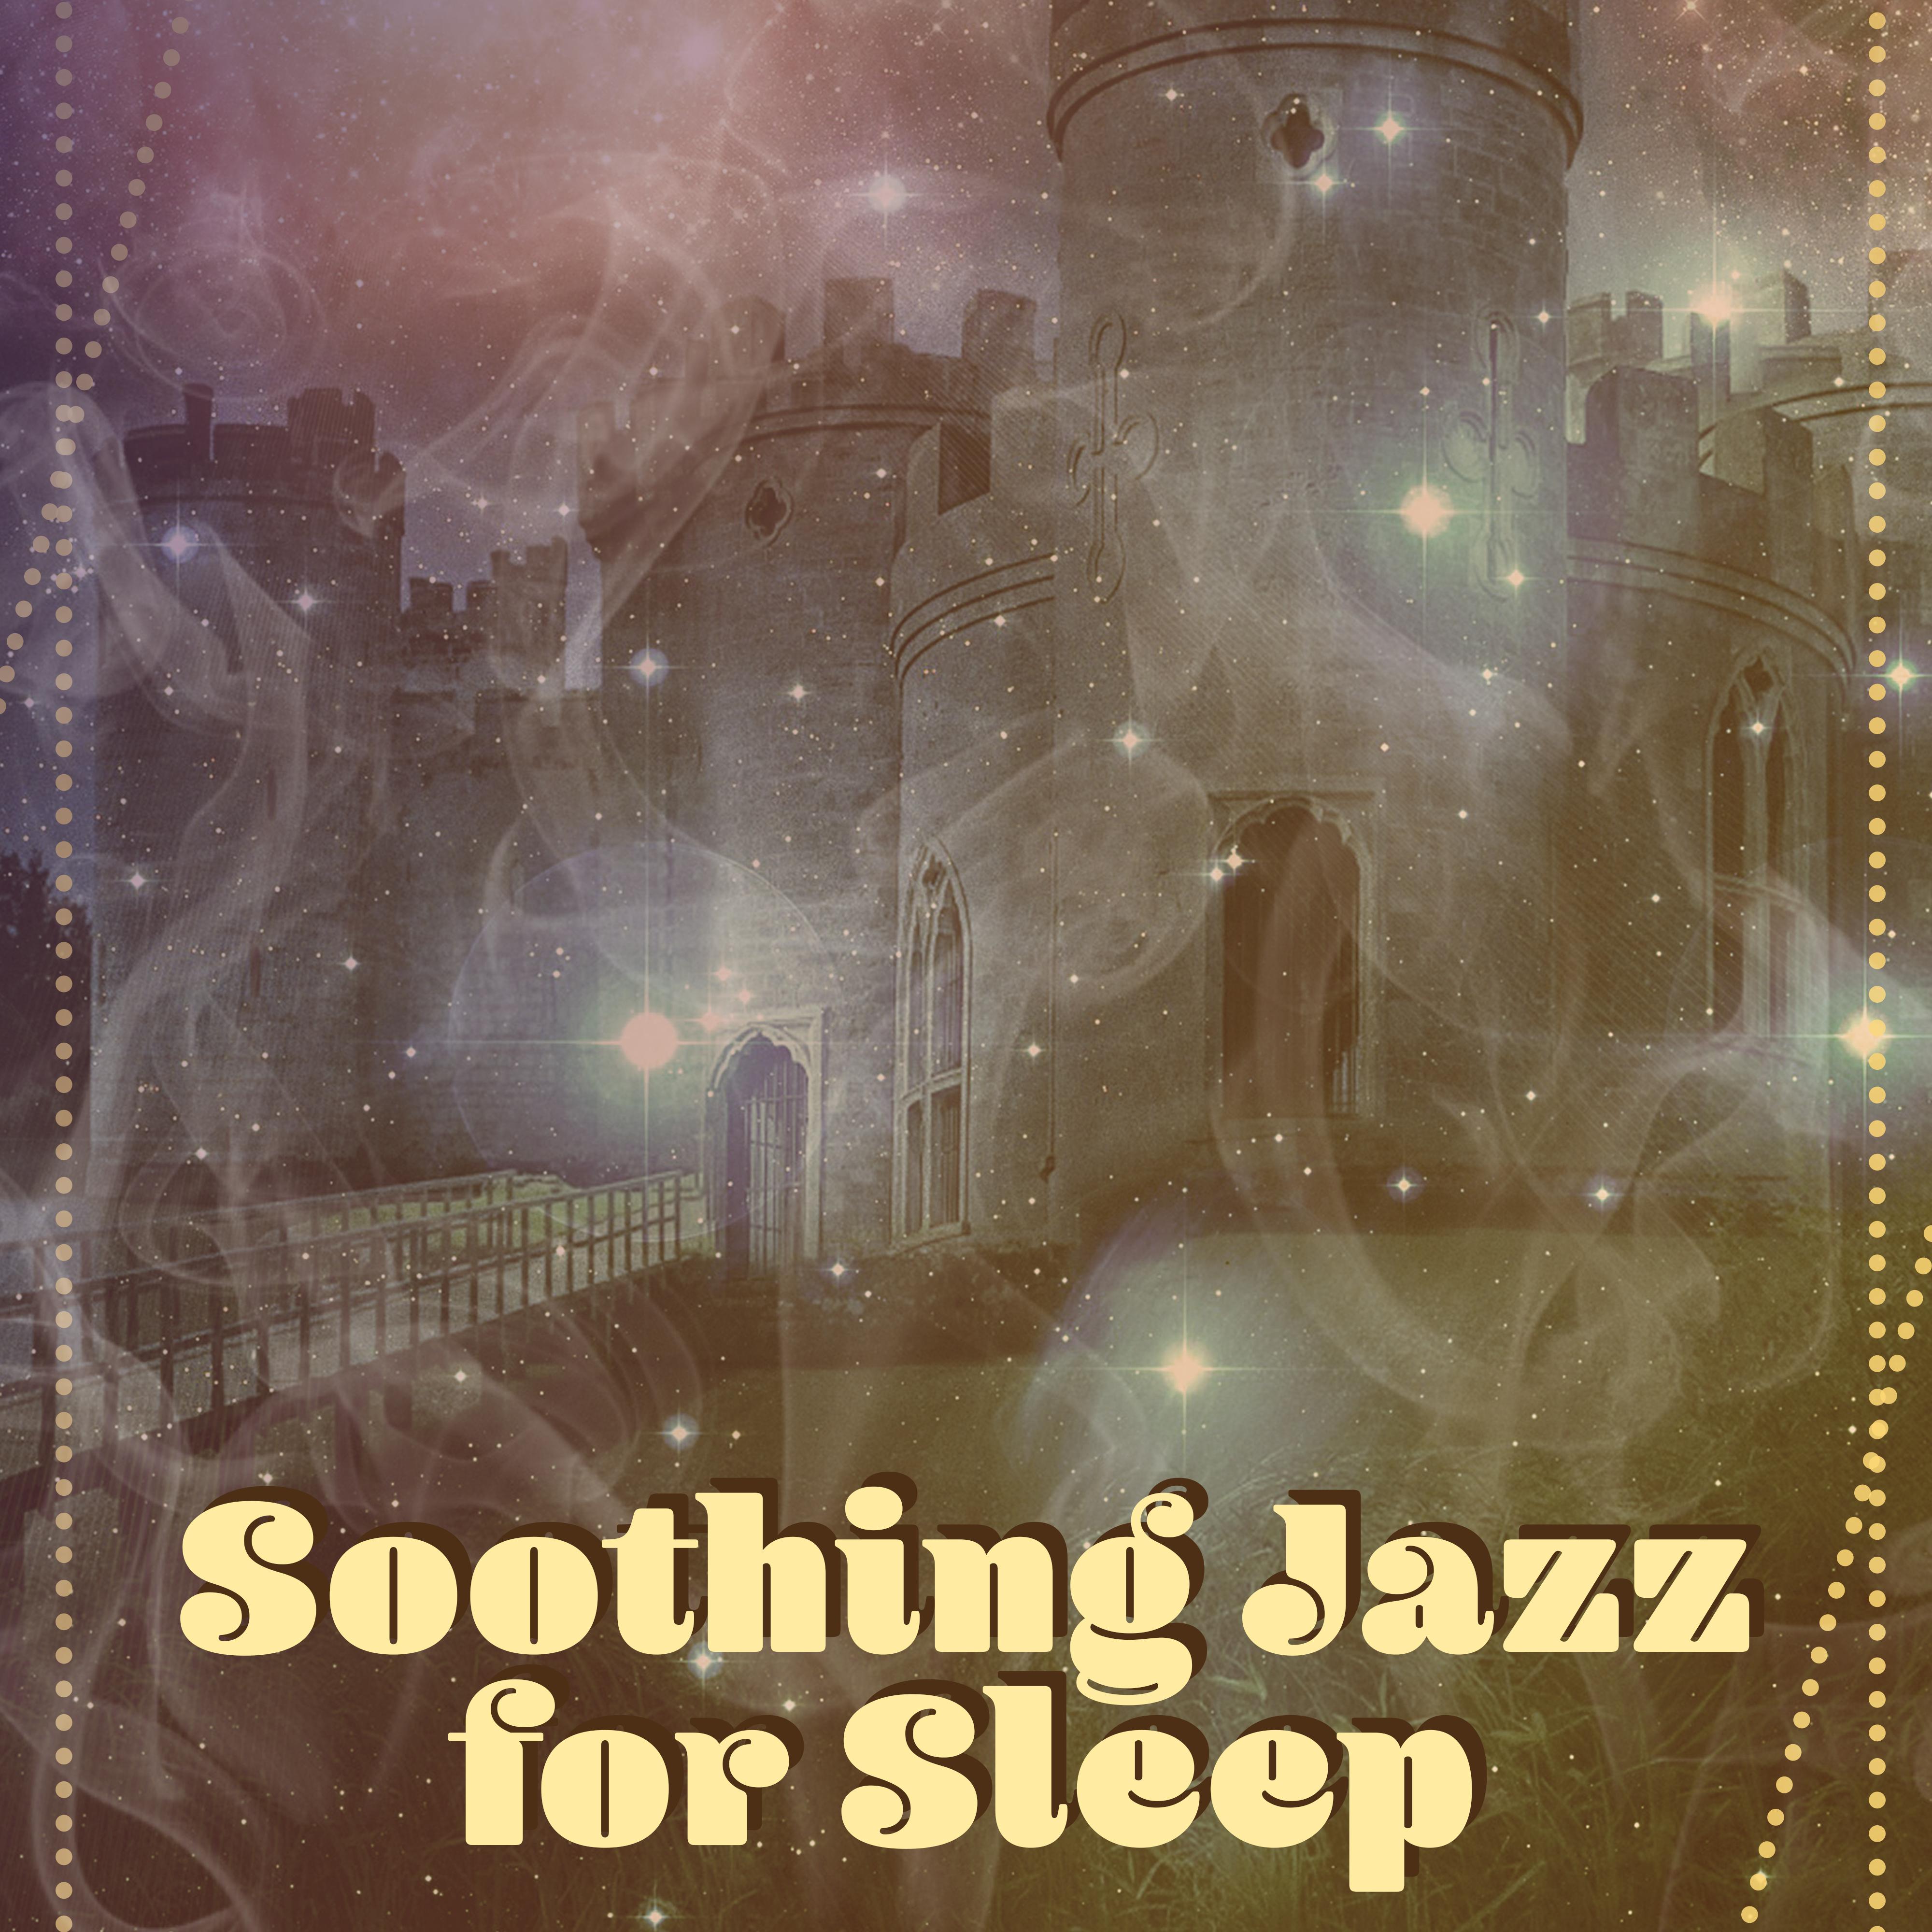 Soothing Jazz for Sleep  Healing Piano for Relaxation, Calming Lullabies to Bed, Deep Sleep, Chilled Jazz, Instrumental Jazz Music, Sounds at Goodnight